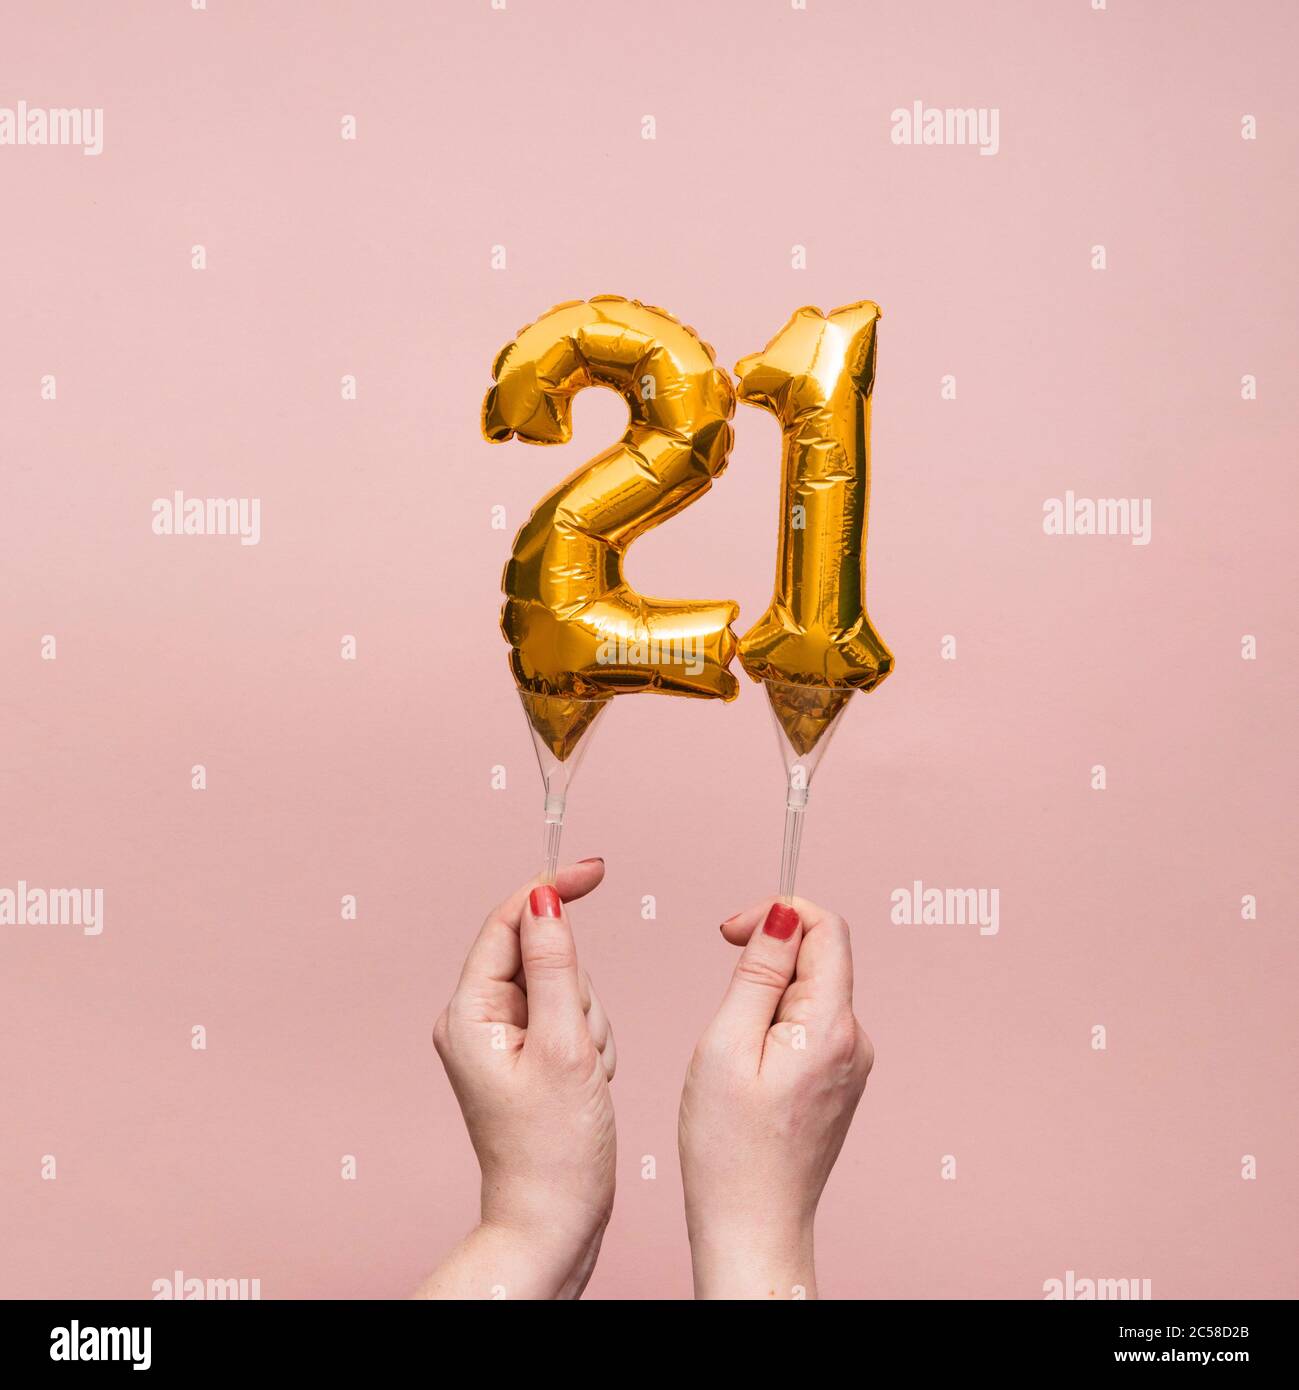 Female hand holding a number 21 birthday anniversary celebration gold balloon Stock Photo